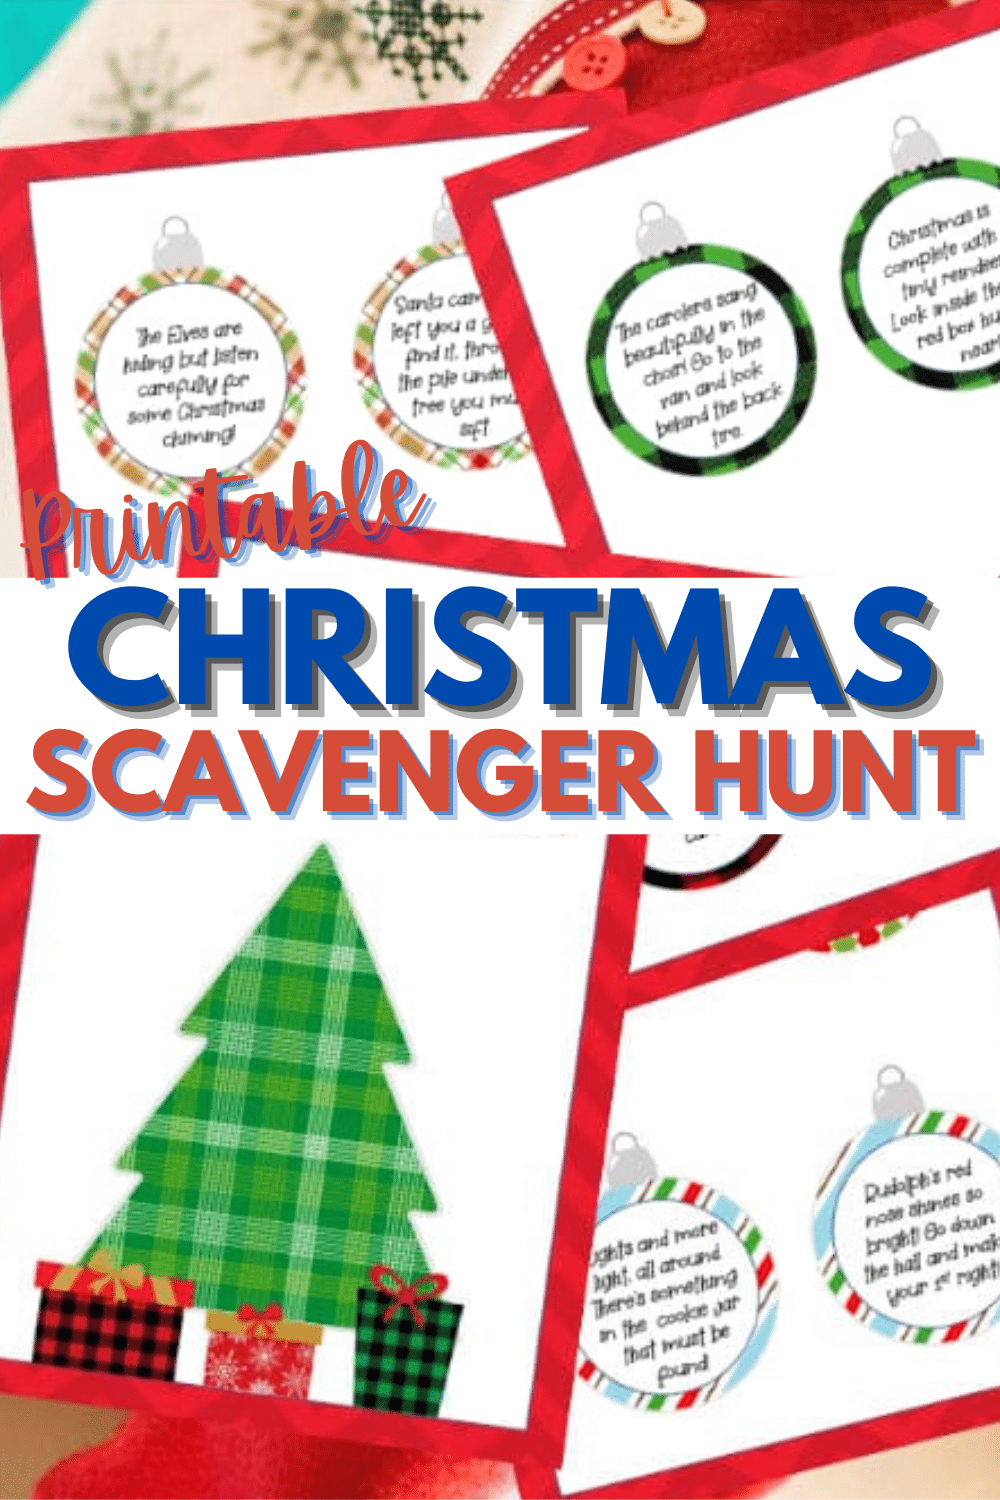 These free printable Christmas scavenger hunt riddles is a great way to make Christmas extra special. A fun way to stay entertained during the holidays. #Christmas #scavengerhunt #printables via @wondermomwannab